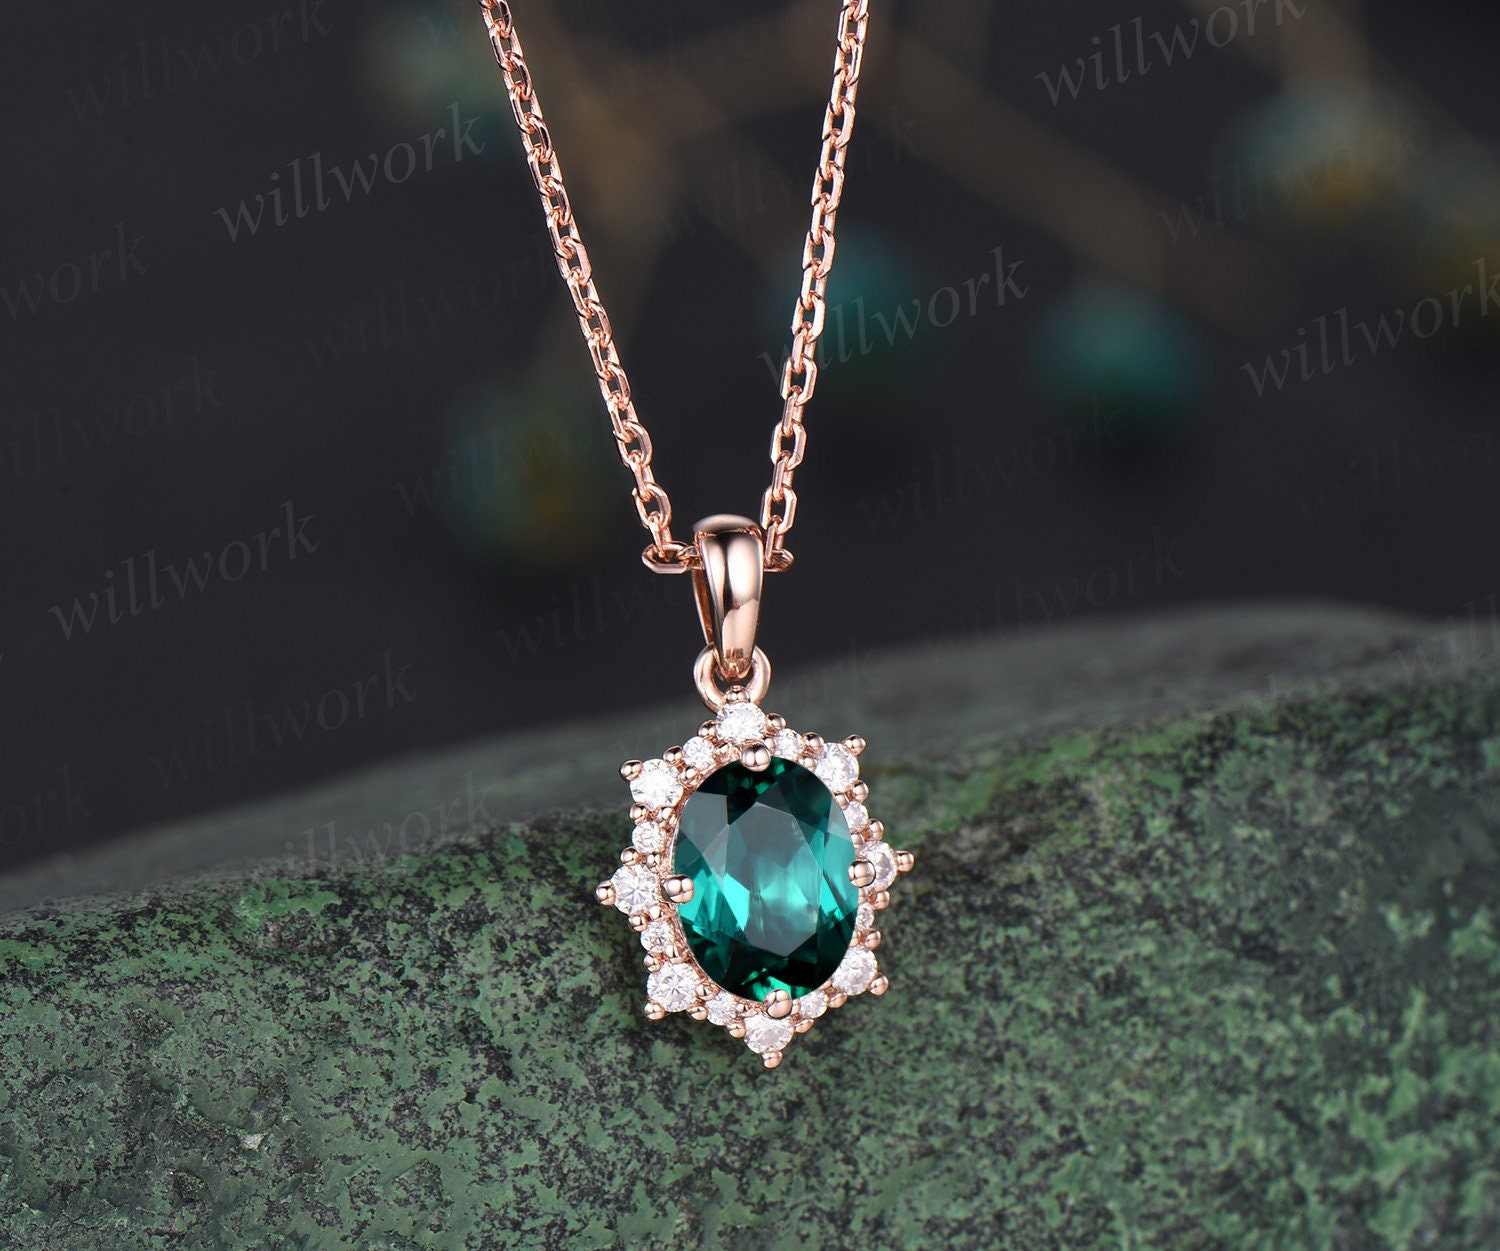 Antique Emerald and Diamond Necklace, France | Antique jewelry, Jewelry  design, Bridal jewelry